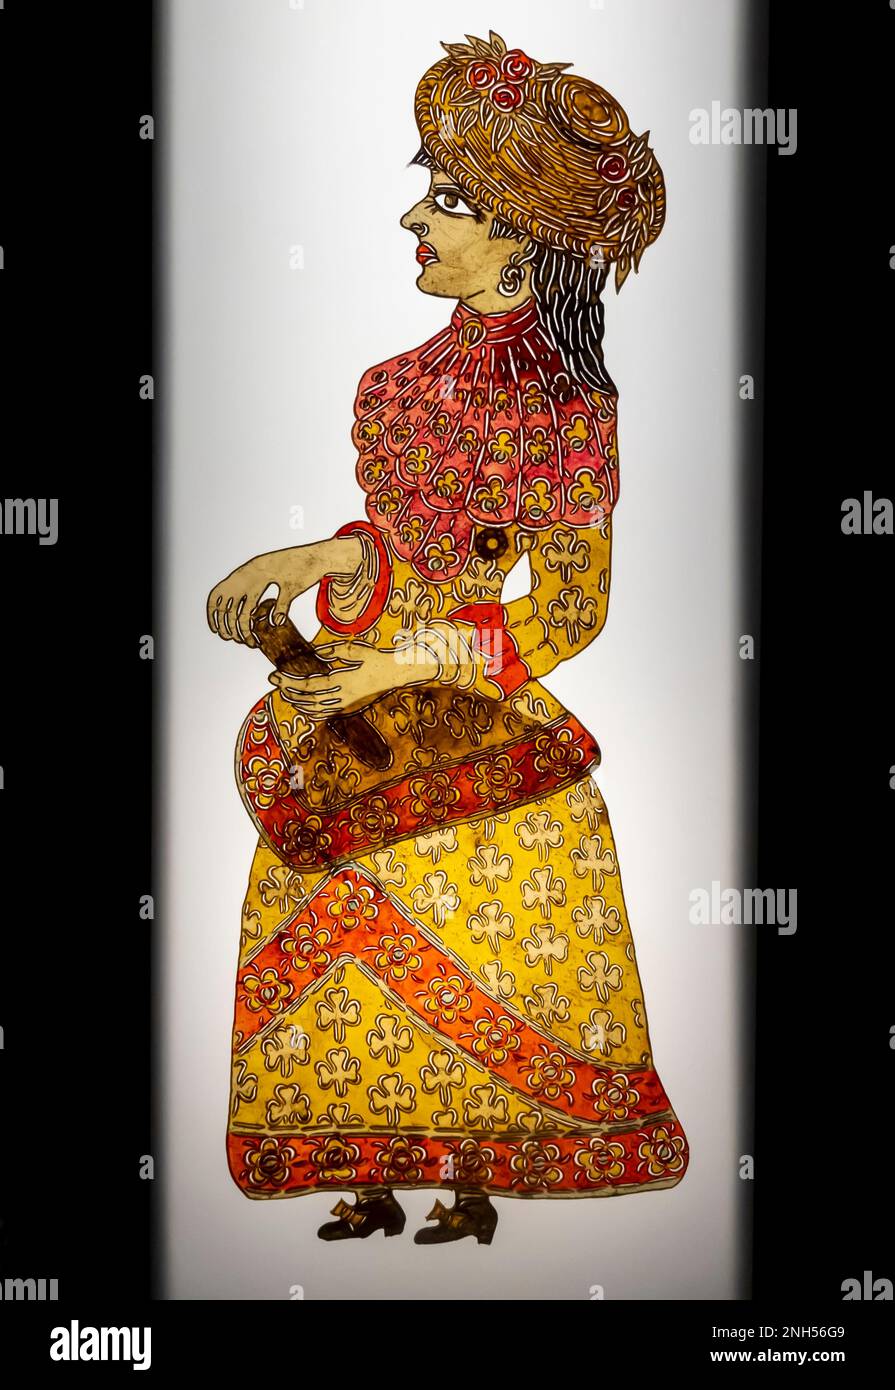 Dame stained glass - republic period. Turkey, 20th century. Women depicted in Turkish art Stock Photo